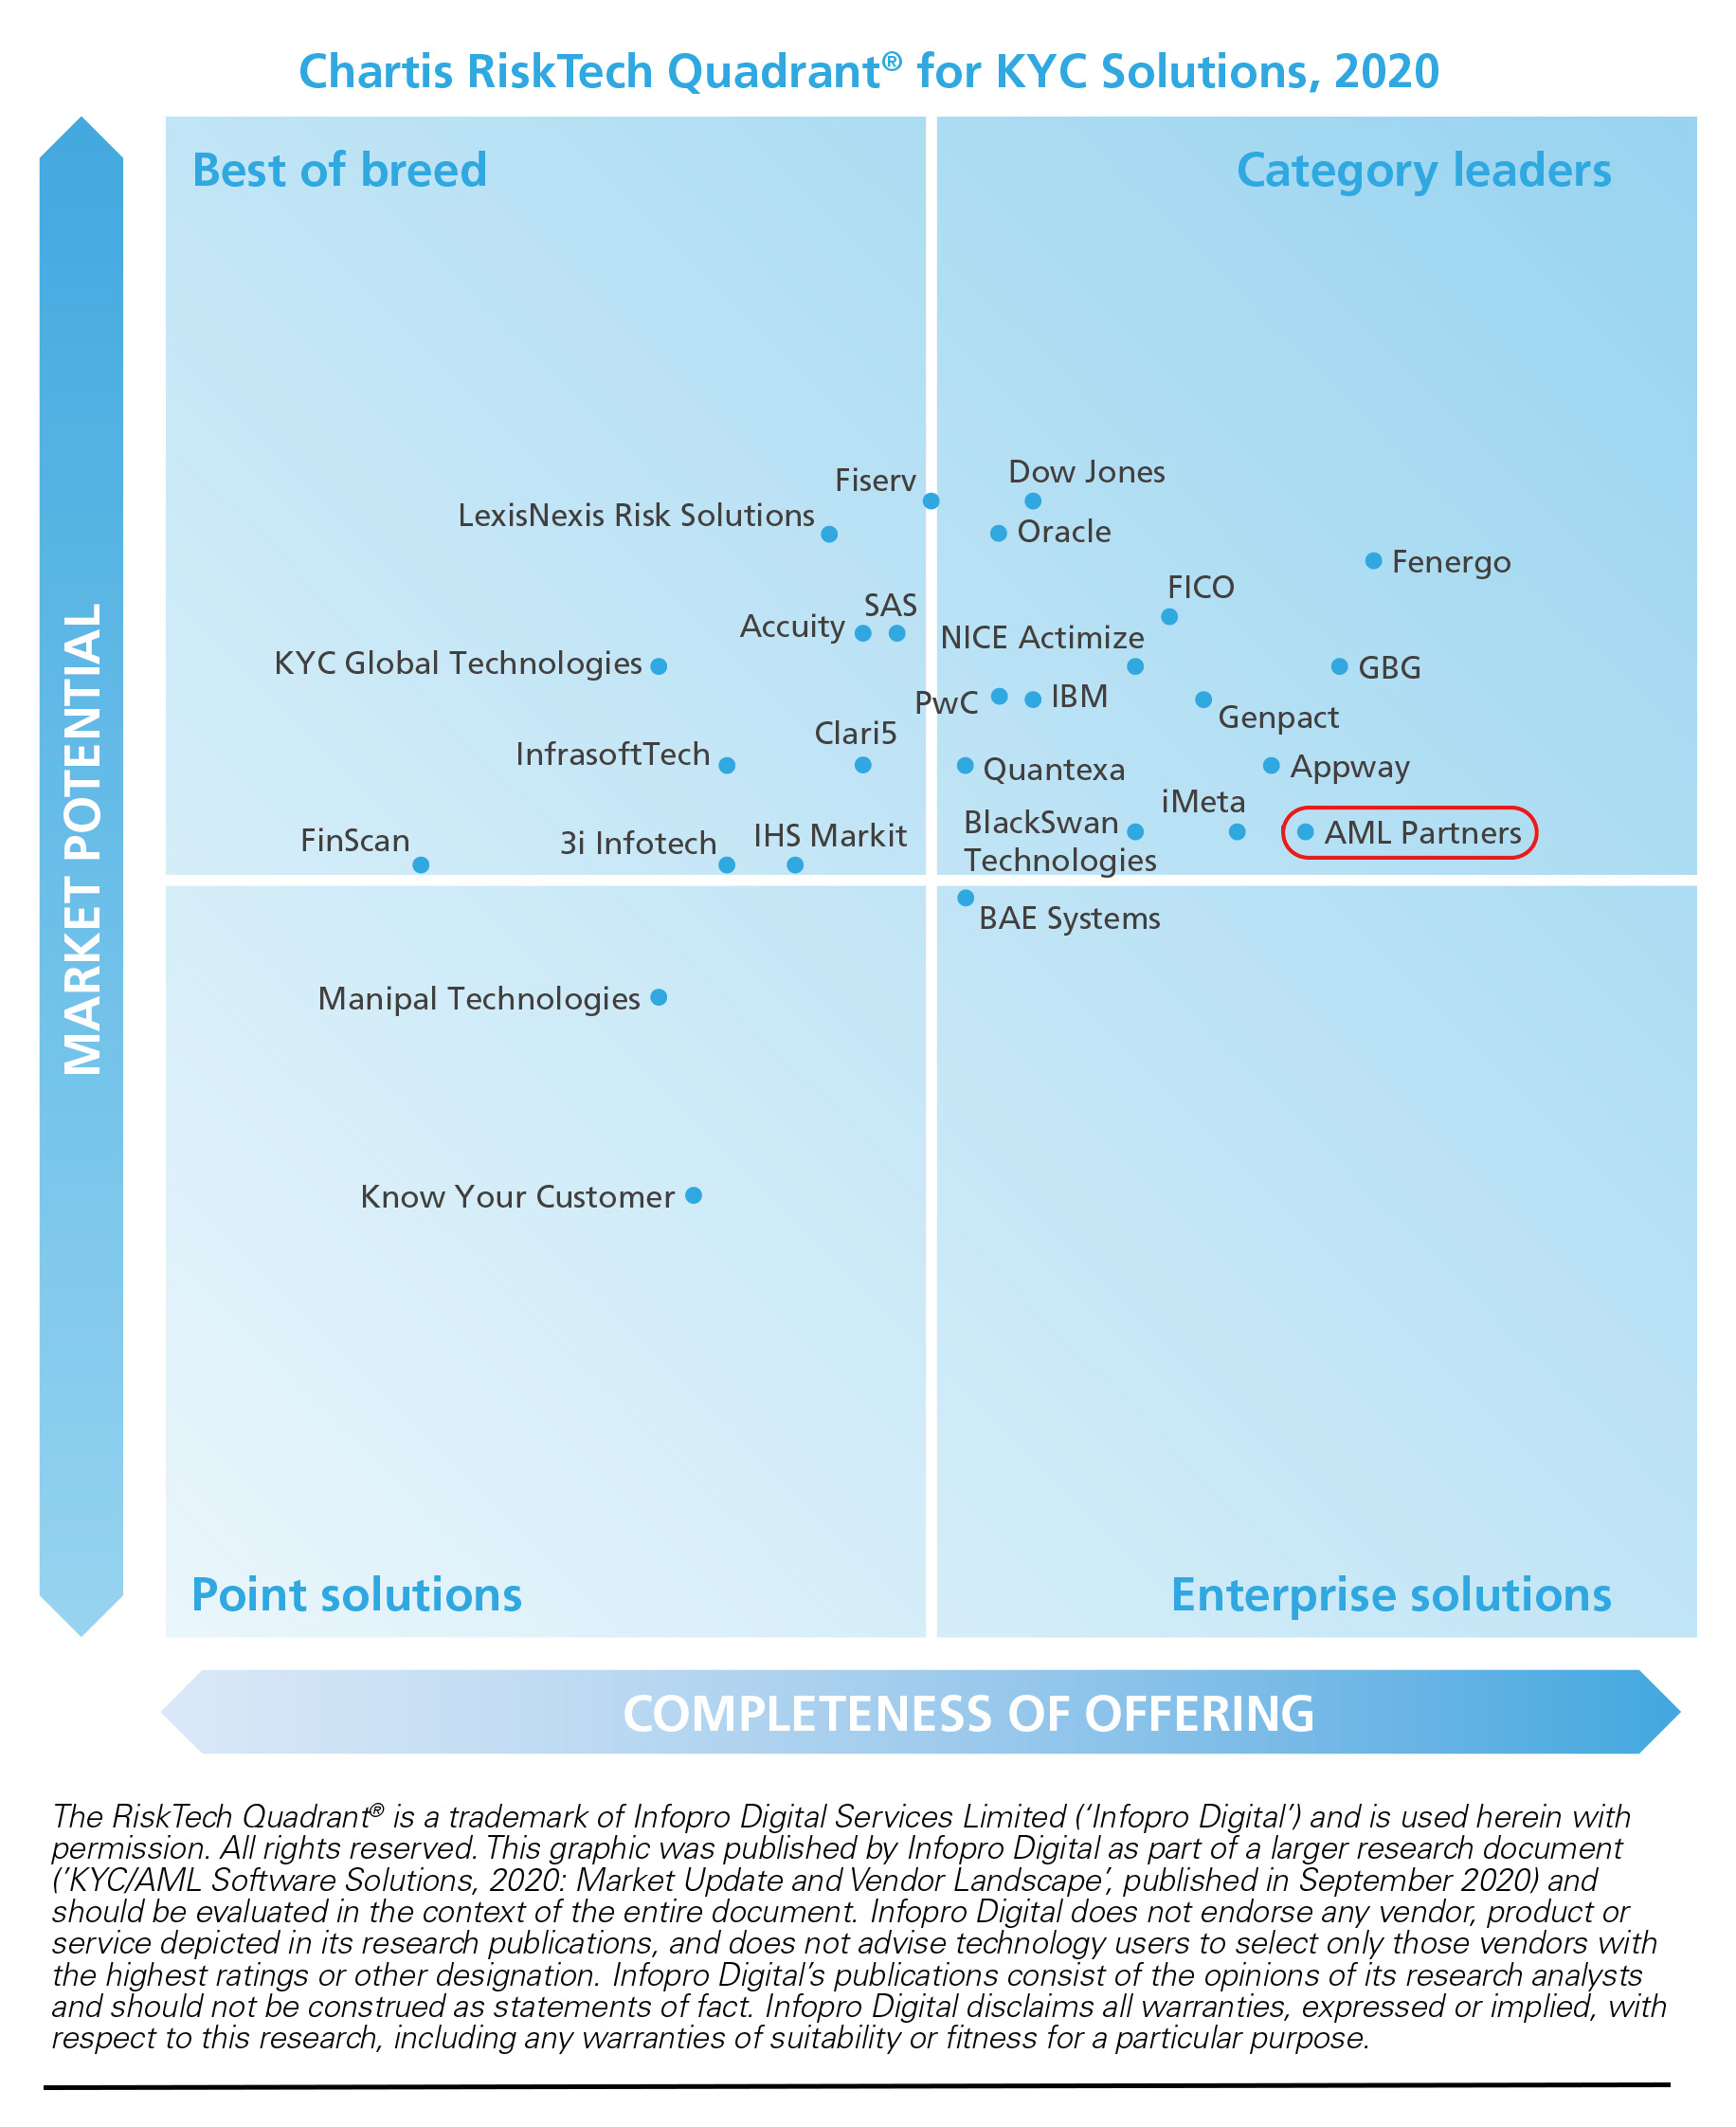 Chartis RiskTech Quadrant® ranks AML Partners a category leader in KYC Solutions.